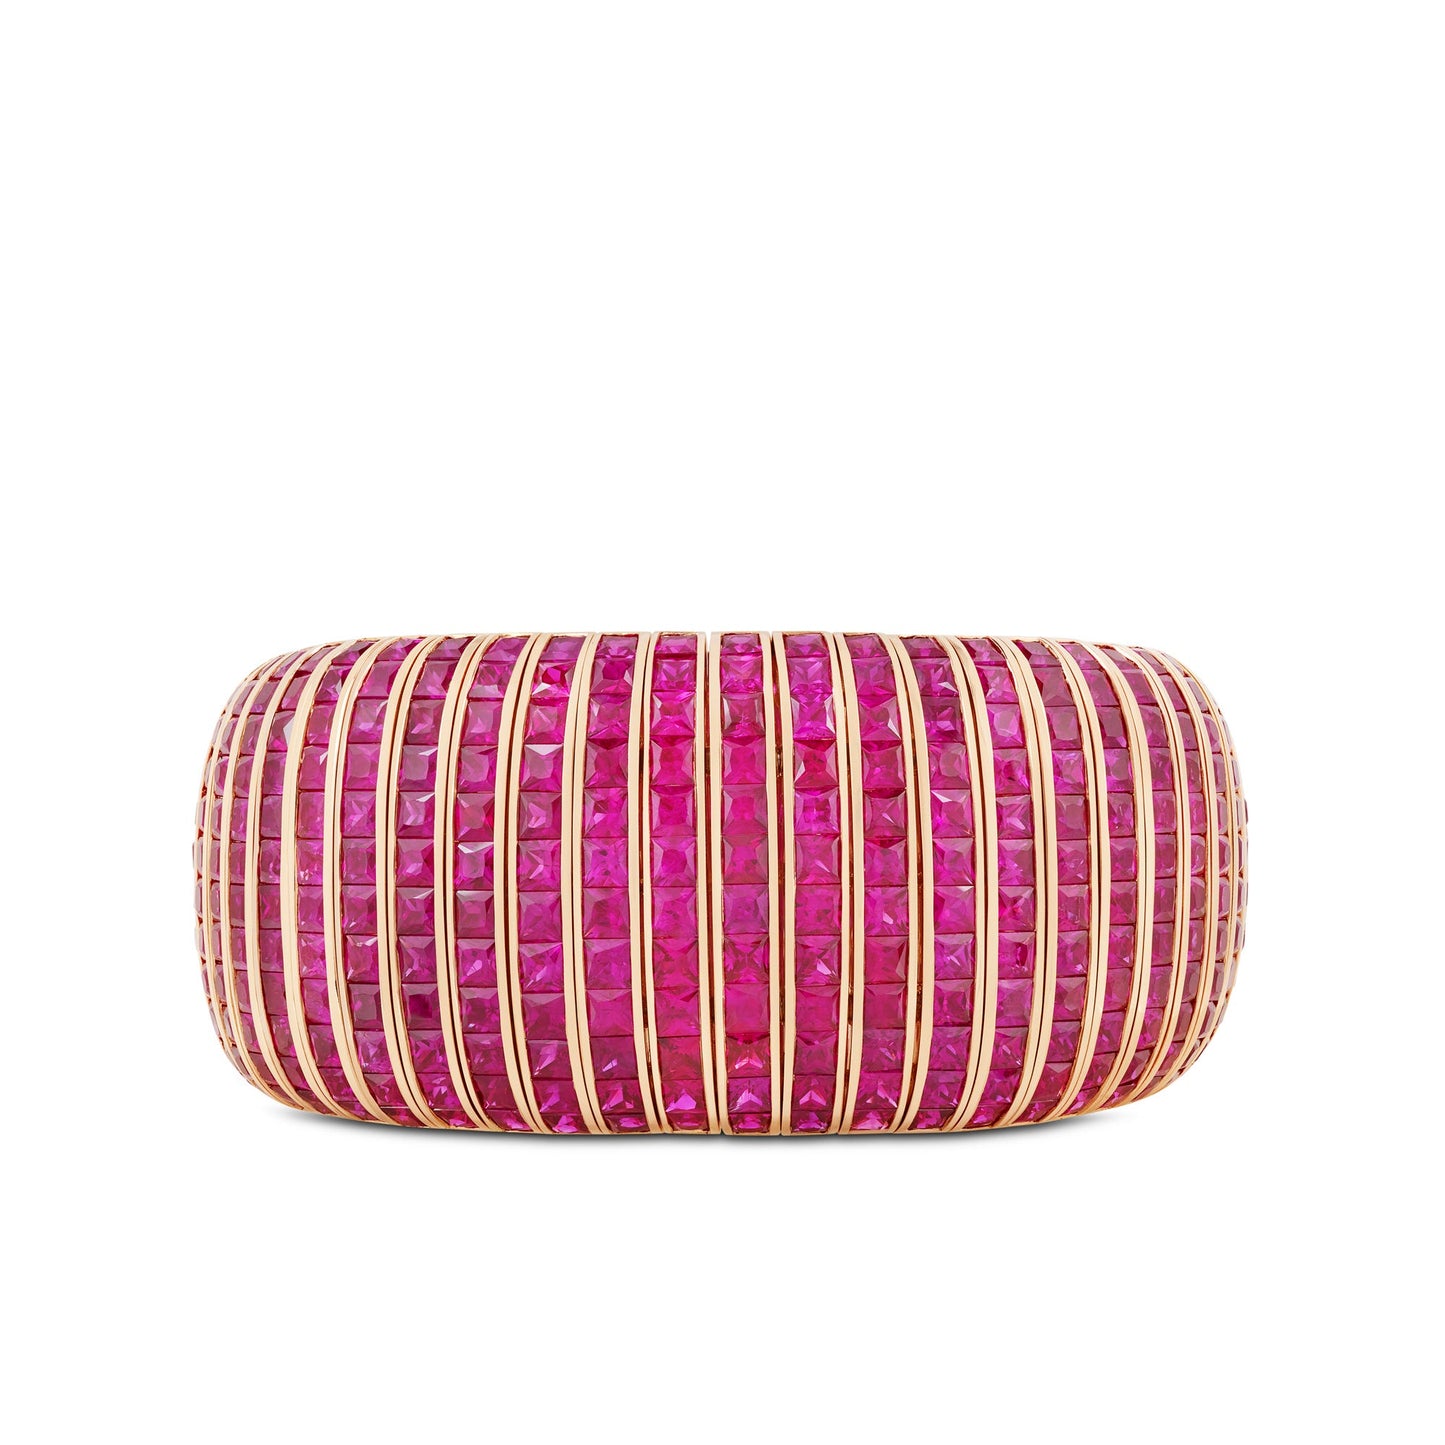 Deco Bangle in 18ct Rose Gold with Ruby